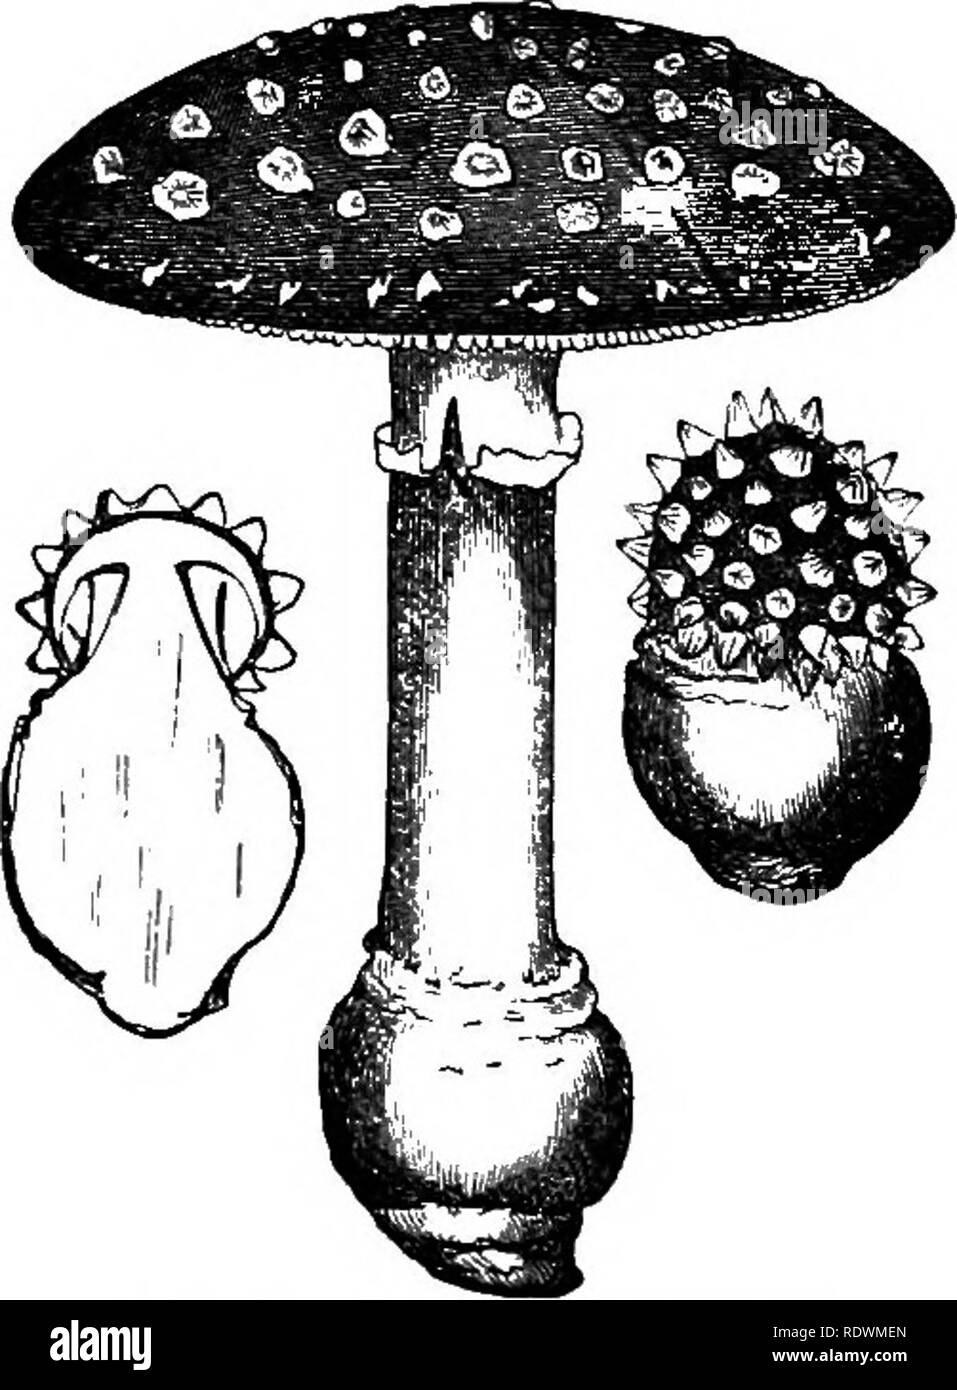 . First forms of vegetation. Botany; Cryptogams. 372 FIXST FORMS OF VEGETATION. rics are more wholesome fresh than stale, and should therefore be prepared for the table as soon as possible after being collected. The intoxicating Siberian fungus or Fly Agaric {Agaricus inuscaritLs, Fig. 39), so called because a decoction of it used to be employed as a fly poison, may be adduced as an illus- tration of the remark- able effects produced by some species of fungi, when growing in foreign countries. We have no experi- ence as yet, in this part of Europe, of any effects so extra- F.G. 39.-agar.cusm;, Stock Photo